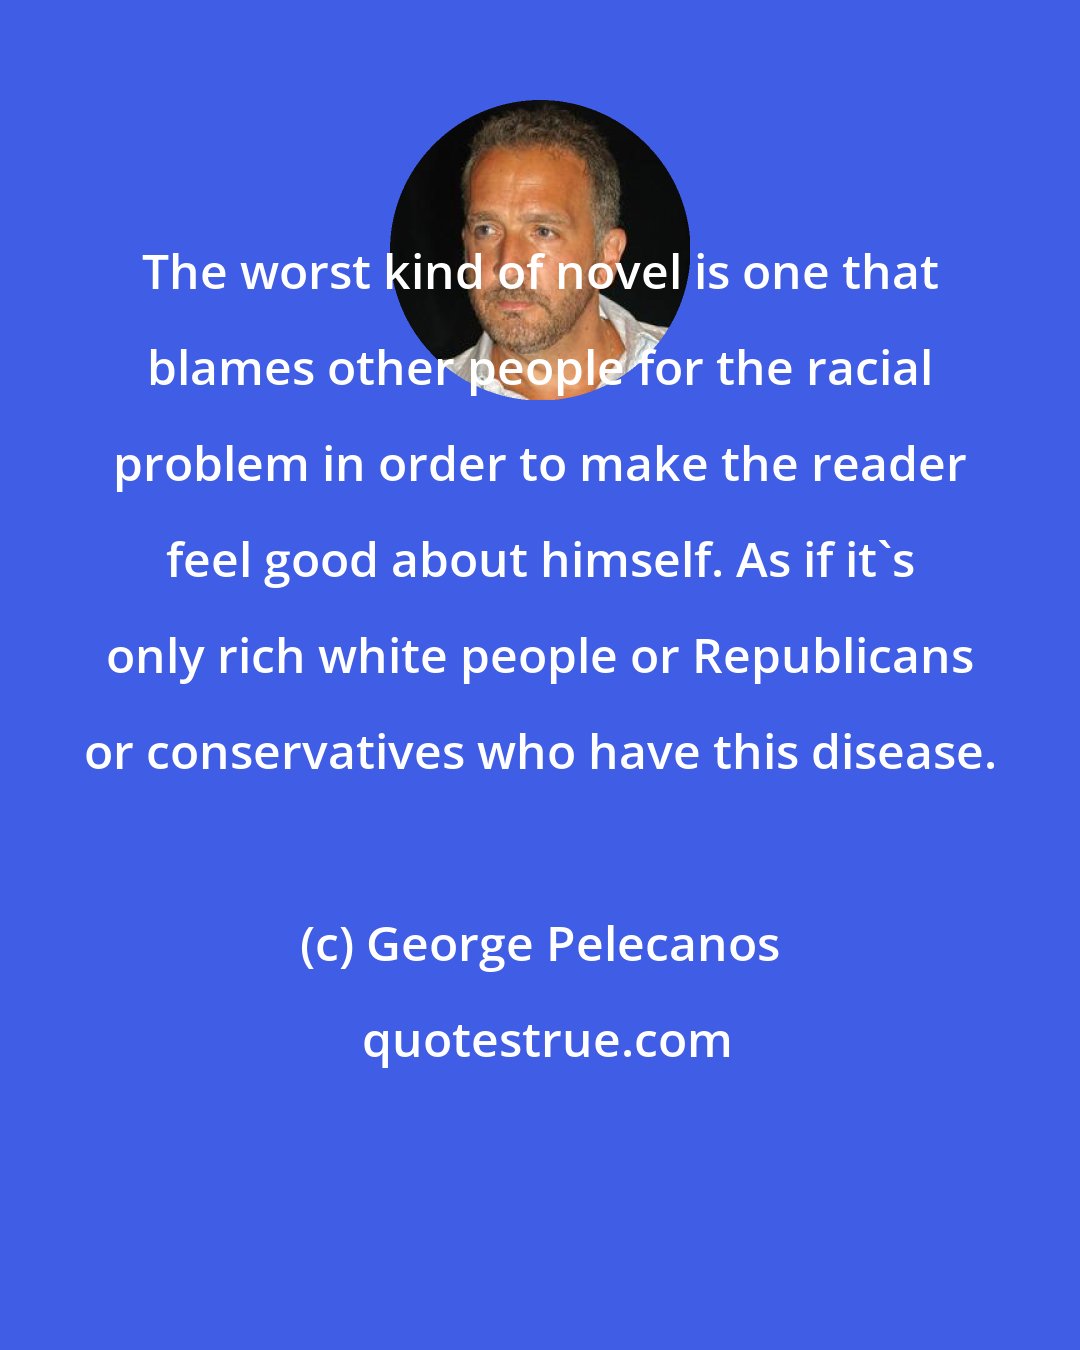 George Pelecanos: The worst kind of novel is one that blames other people for the racial problem in order to make the reader feel good about himself. As if it's only rich white people or Republicans or conservatives who have this disease.